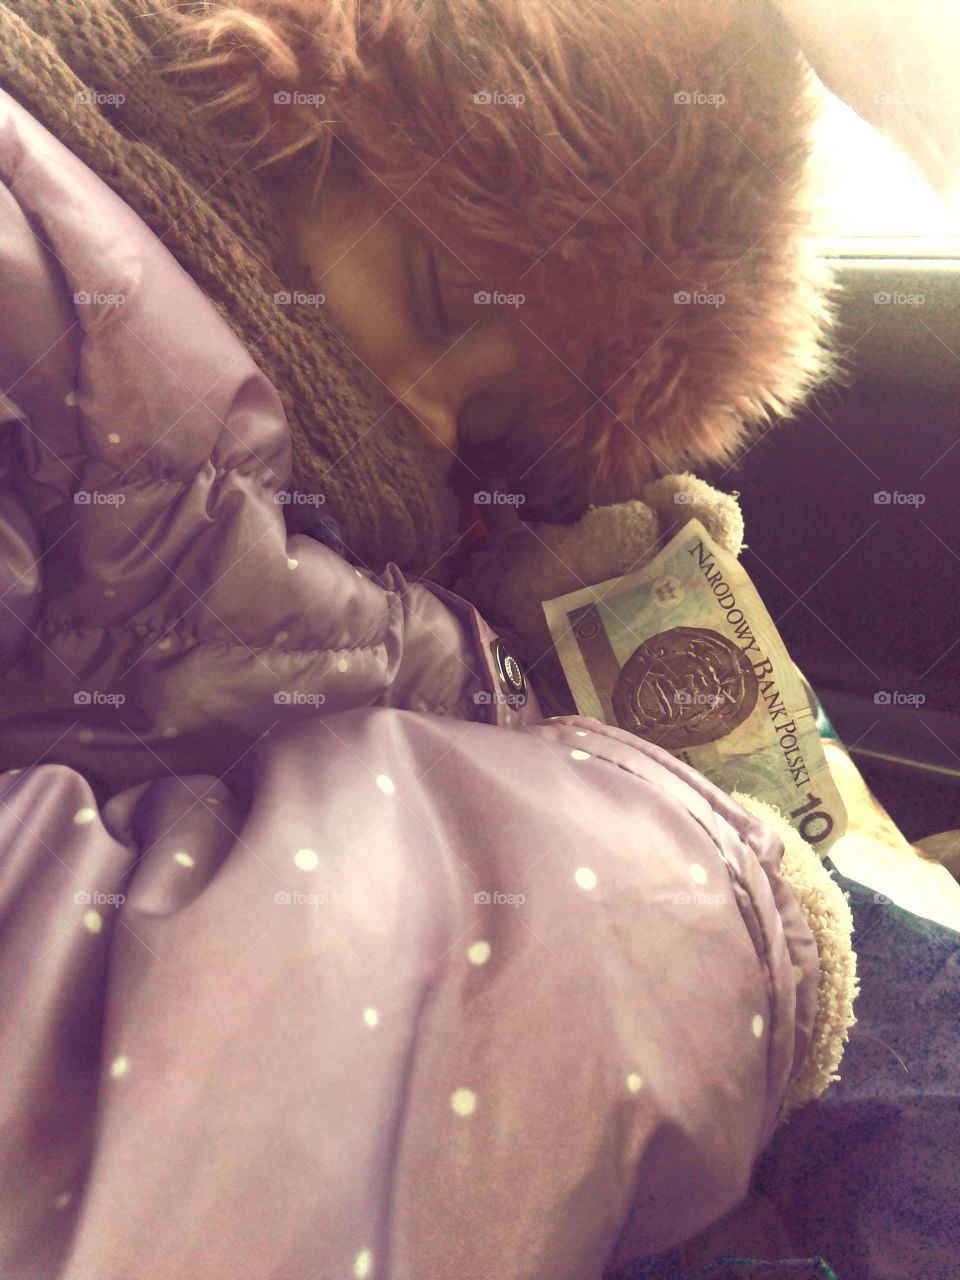 Child holding currency in hand while sleeping